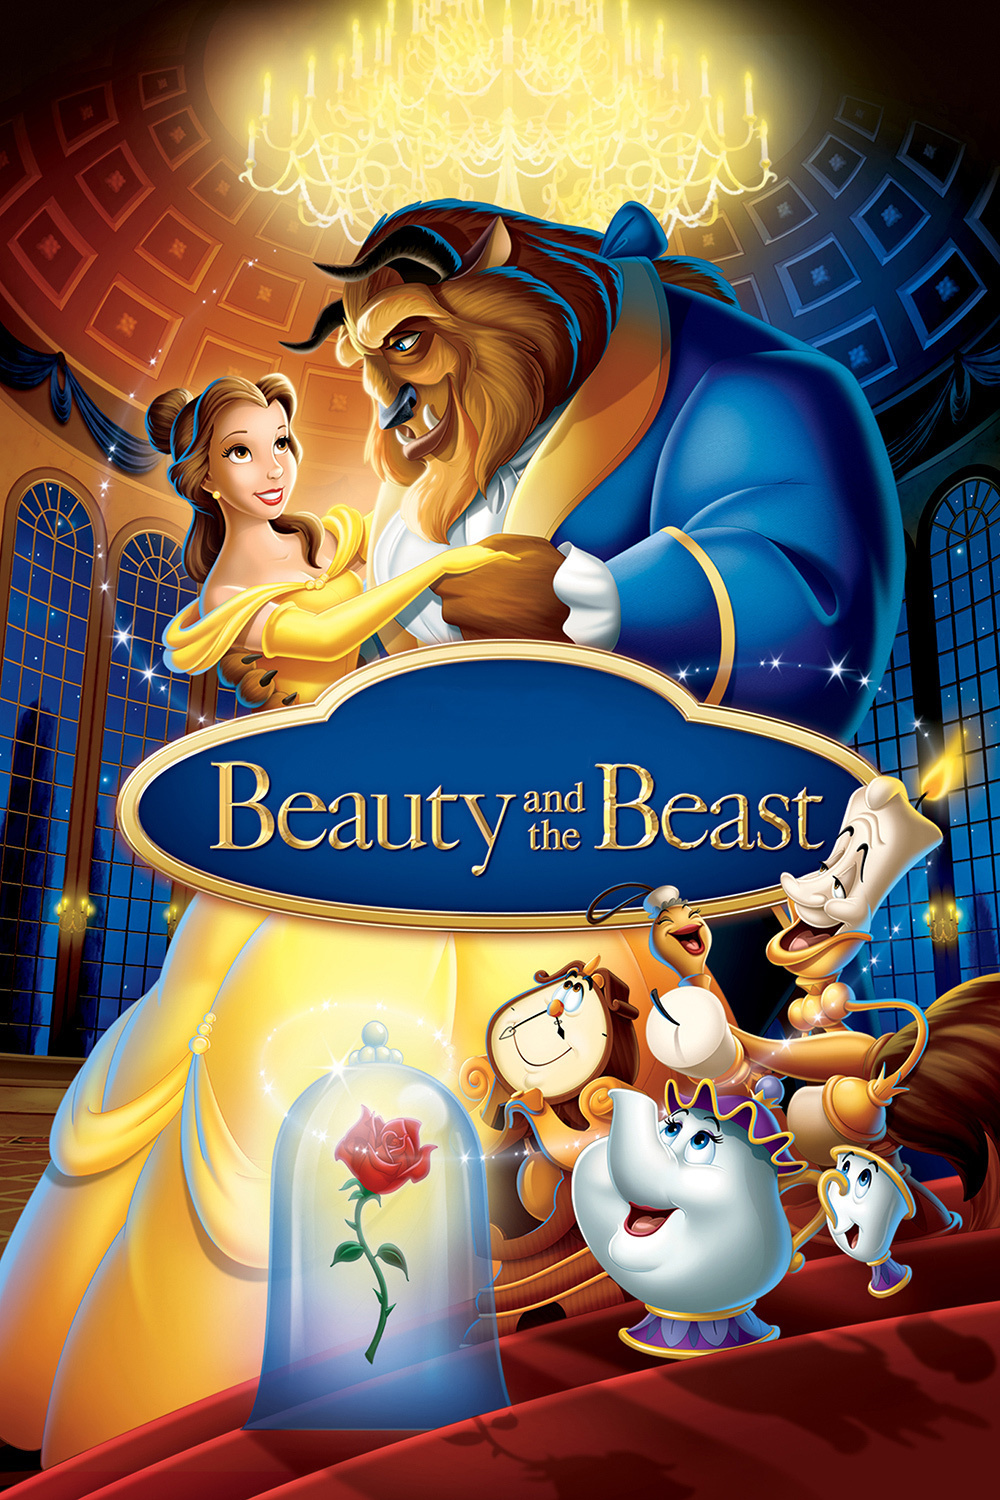 1991 Beauty and the Beast movie poster